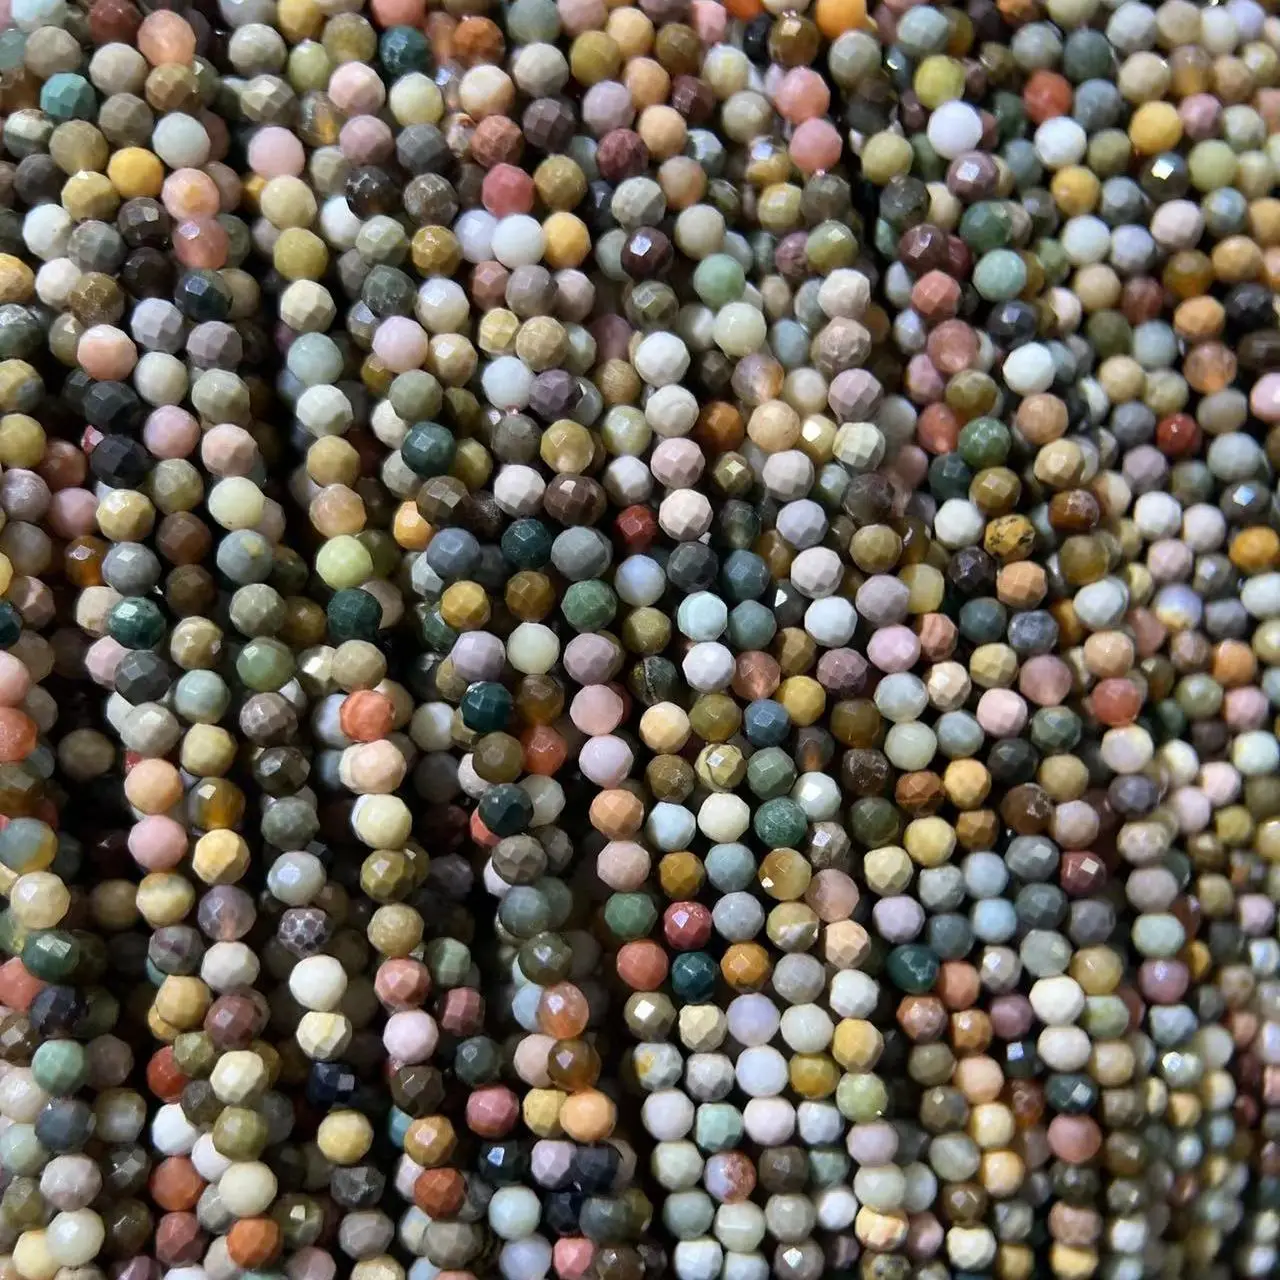 

High Quality Natural Ocean Agate Faceted Cutting Colored Gemstone Delicate Seed Beads For Jewelry Accessories Making